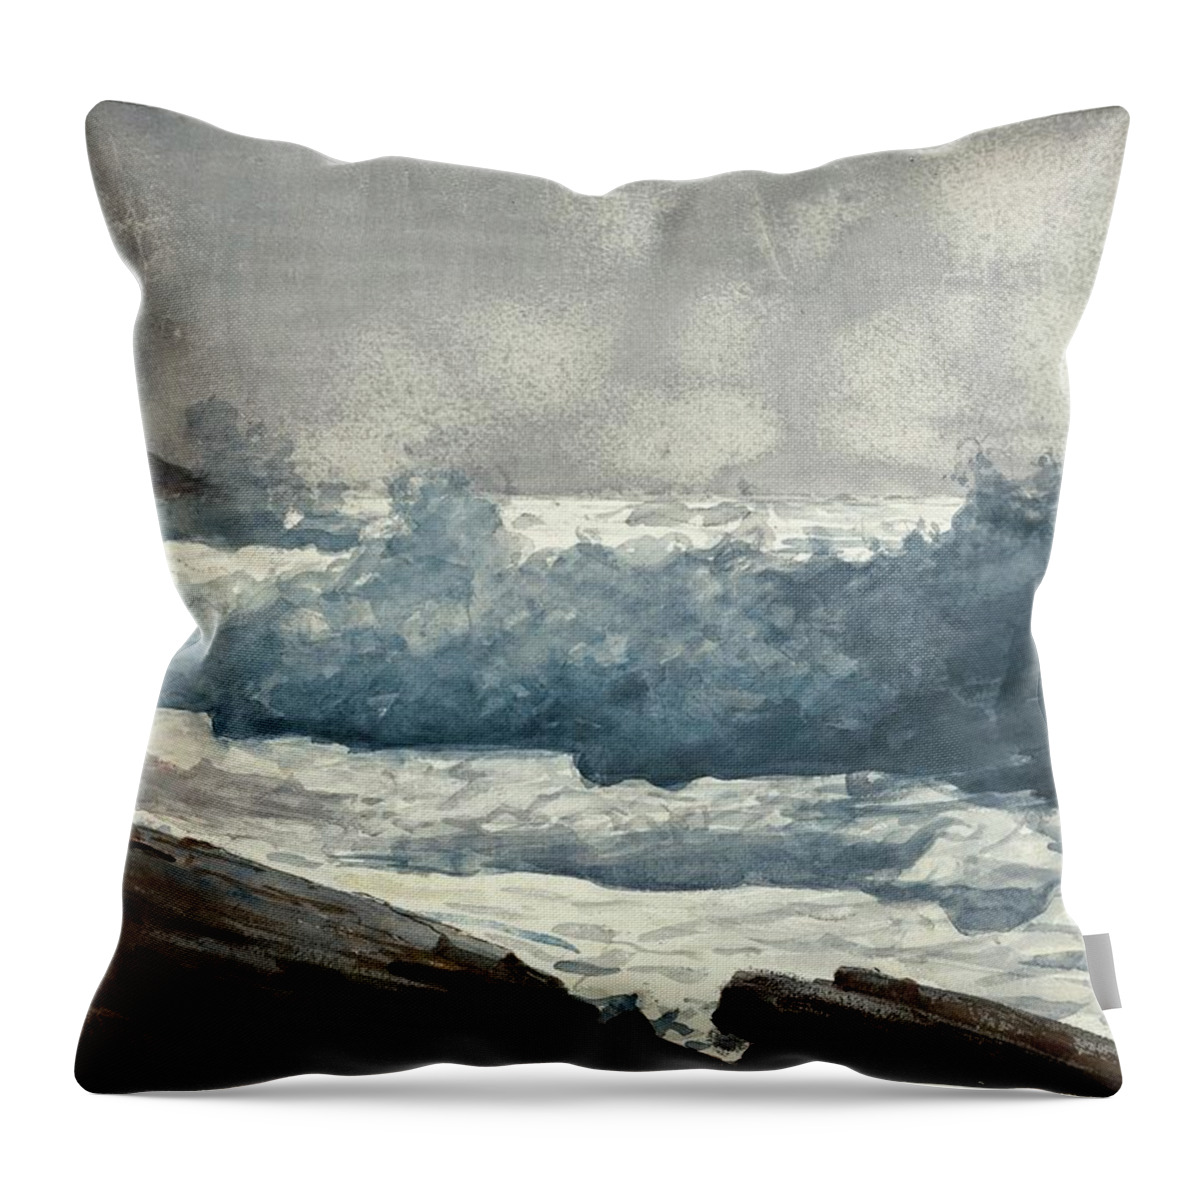 Seascape Throw Pillow featuring the painting Prouts Neck, Breakers by Winslow Homer